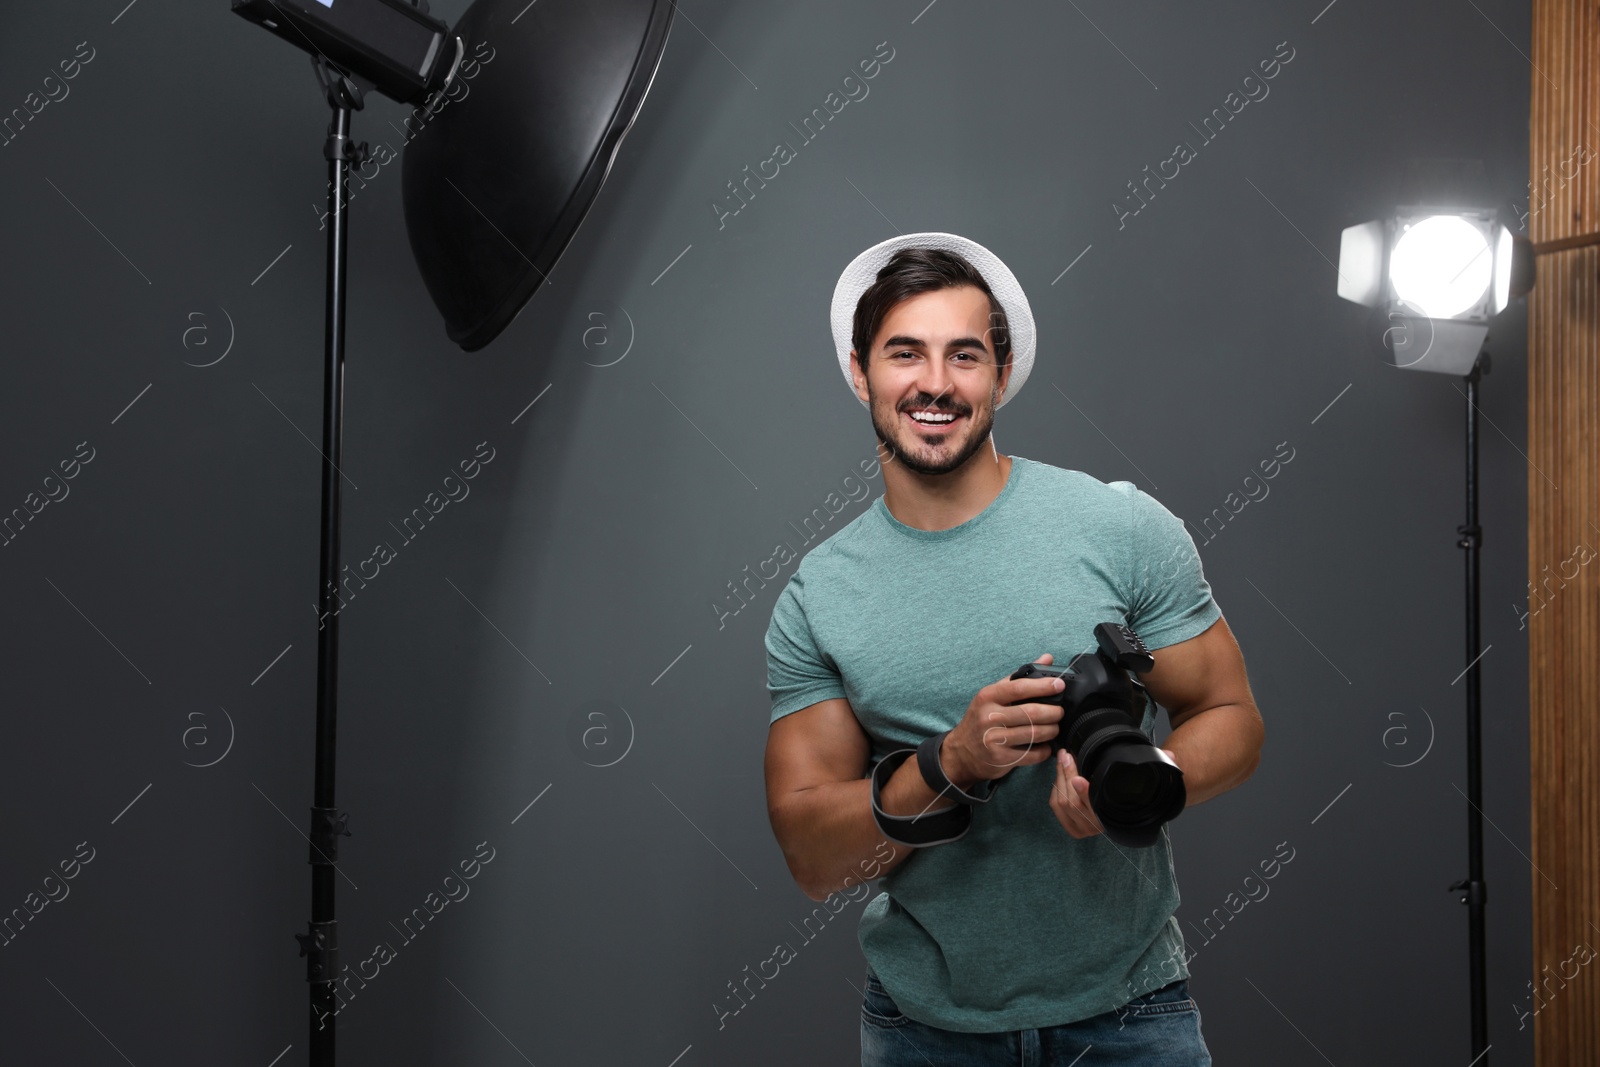 Photo of Professional photographer with modern camera in studio